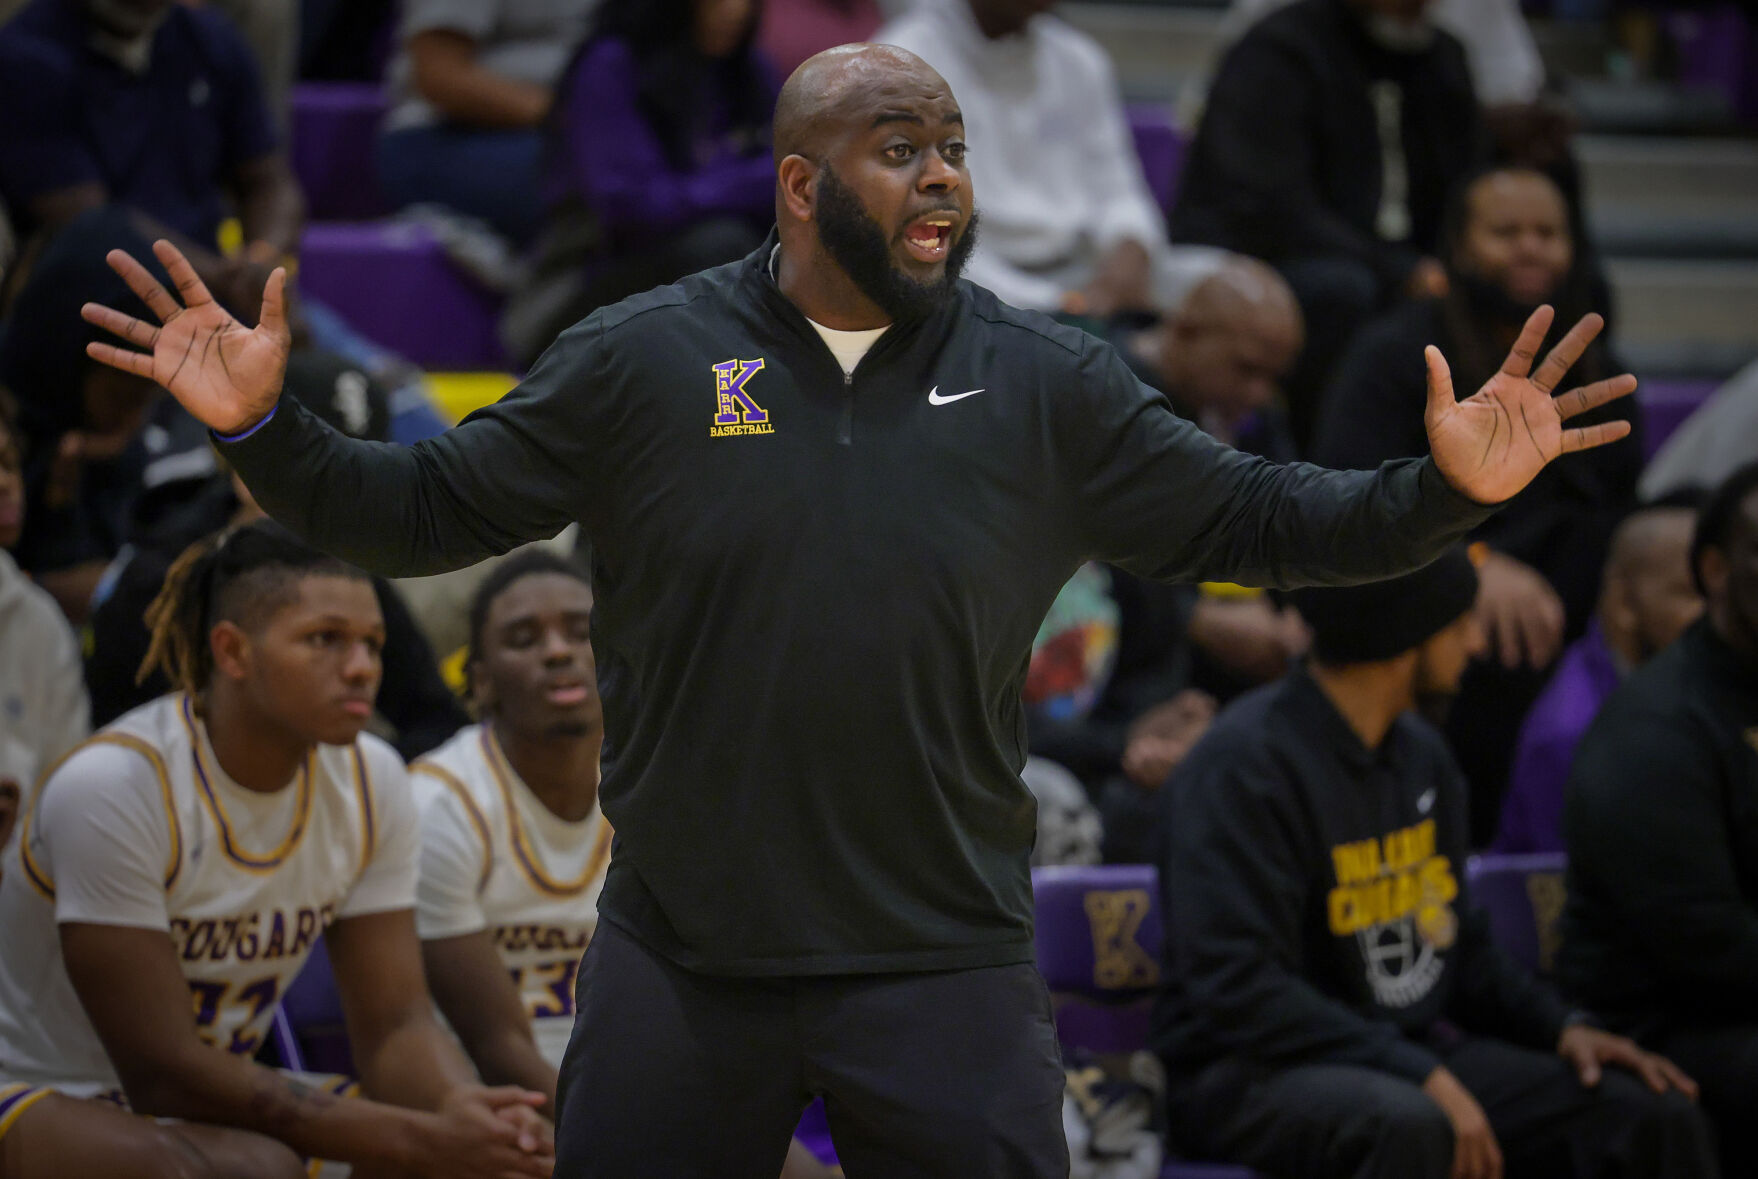 Karr’s Crucial Win Over Landry Impacts State Playoff Seedings